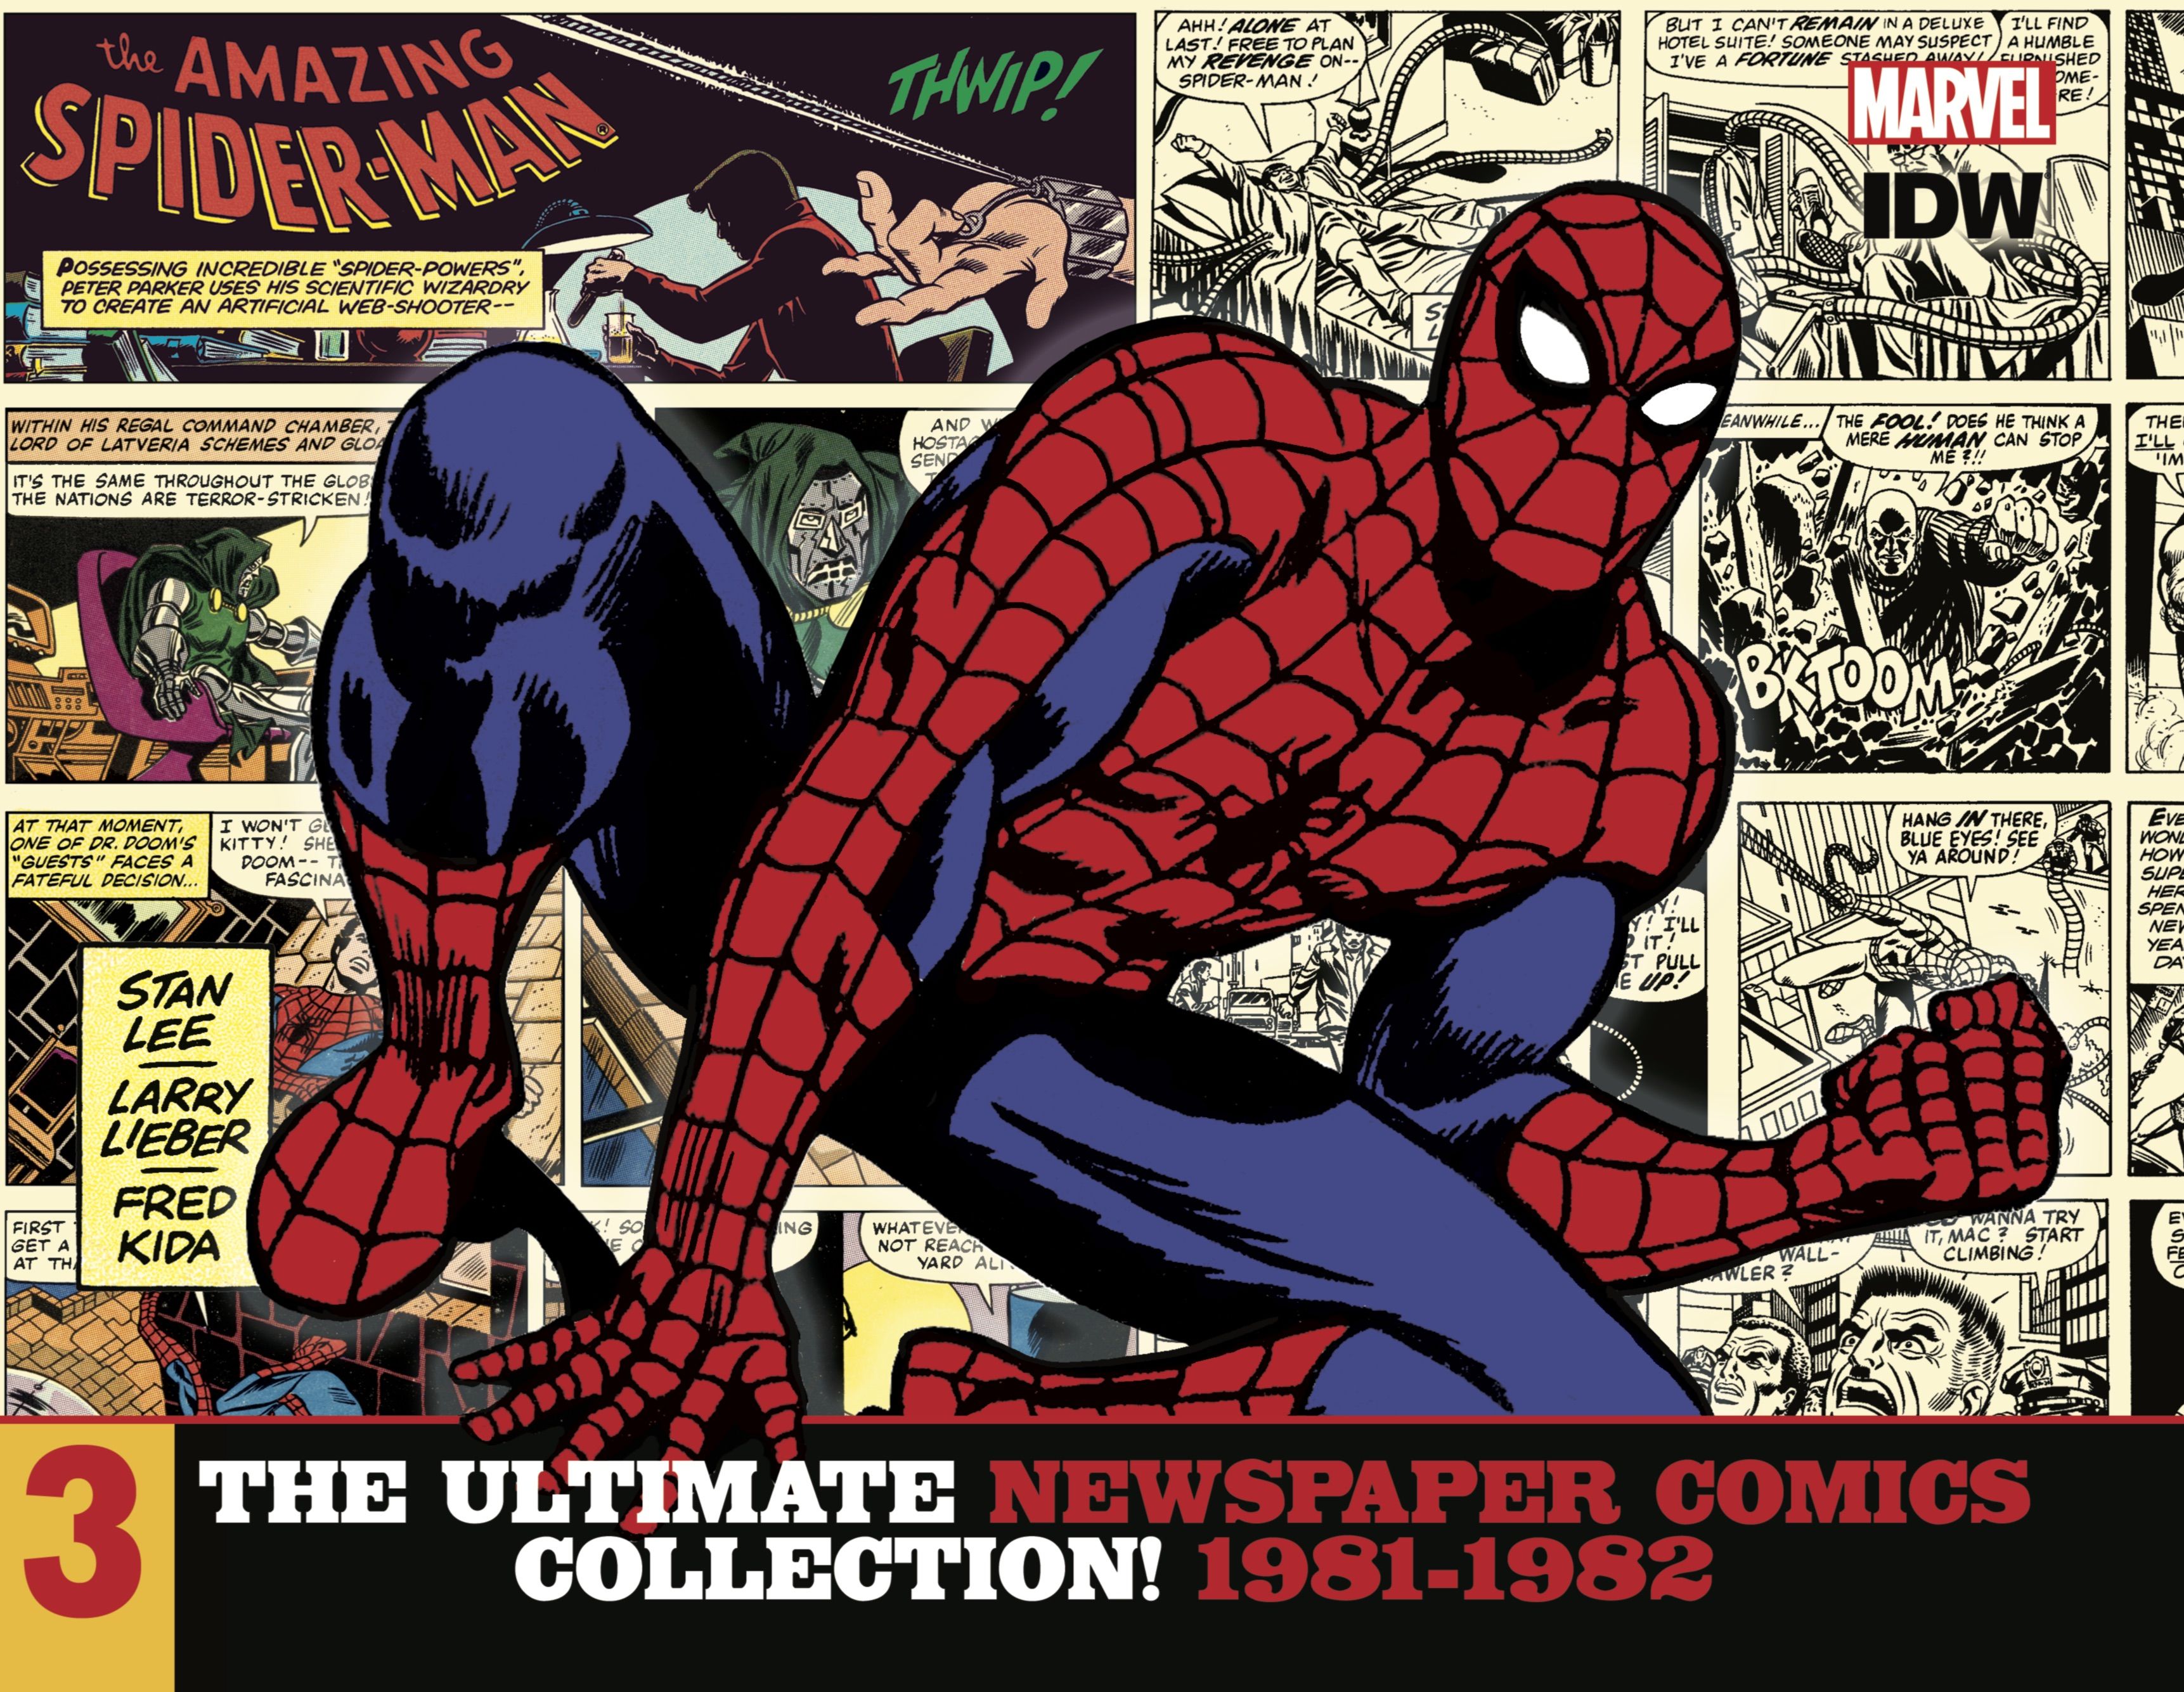 Longtime Amazing Spider-Man comic strip will end after 42 years | SYFY WIRE